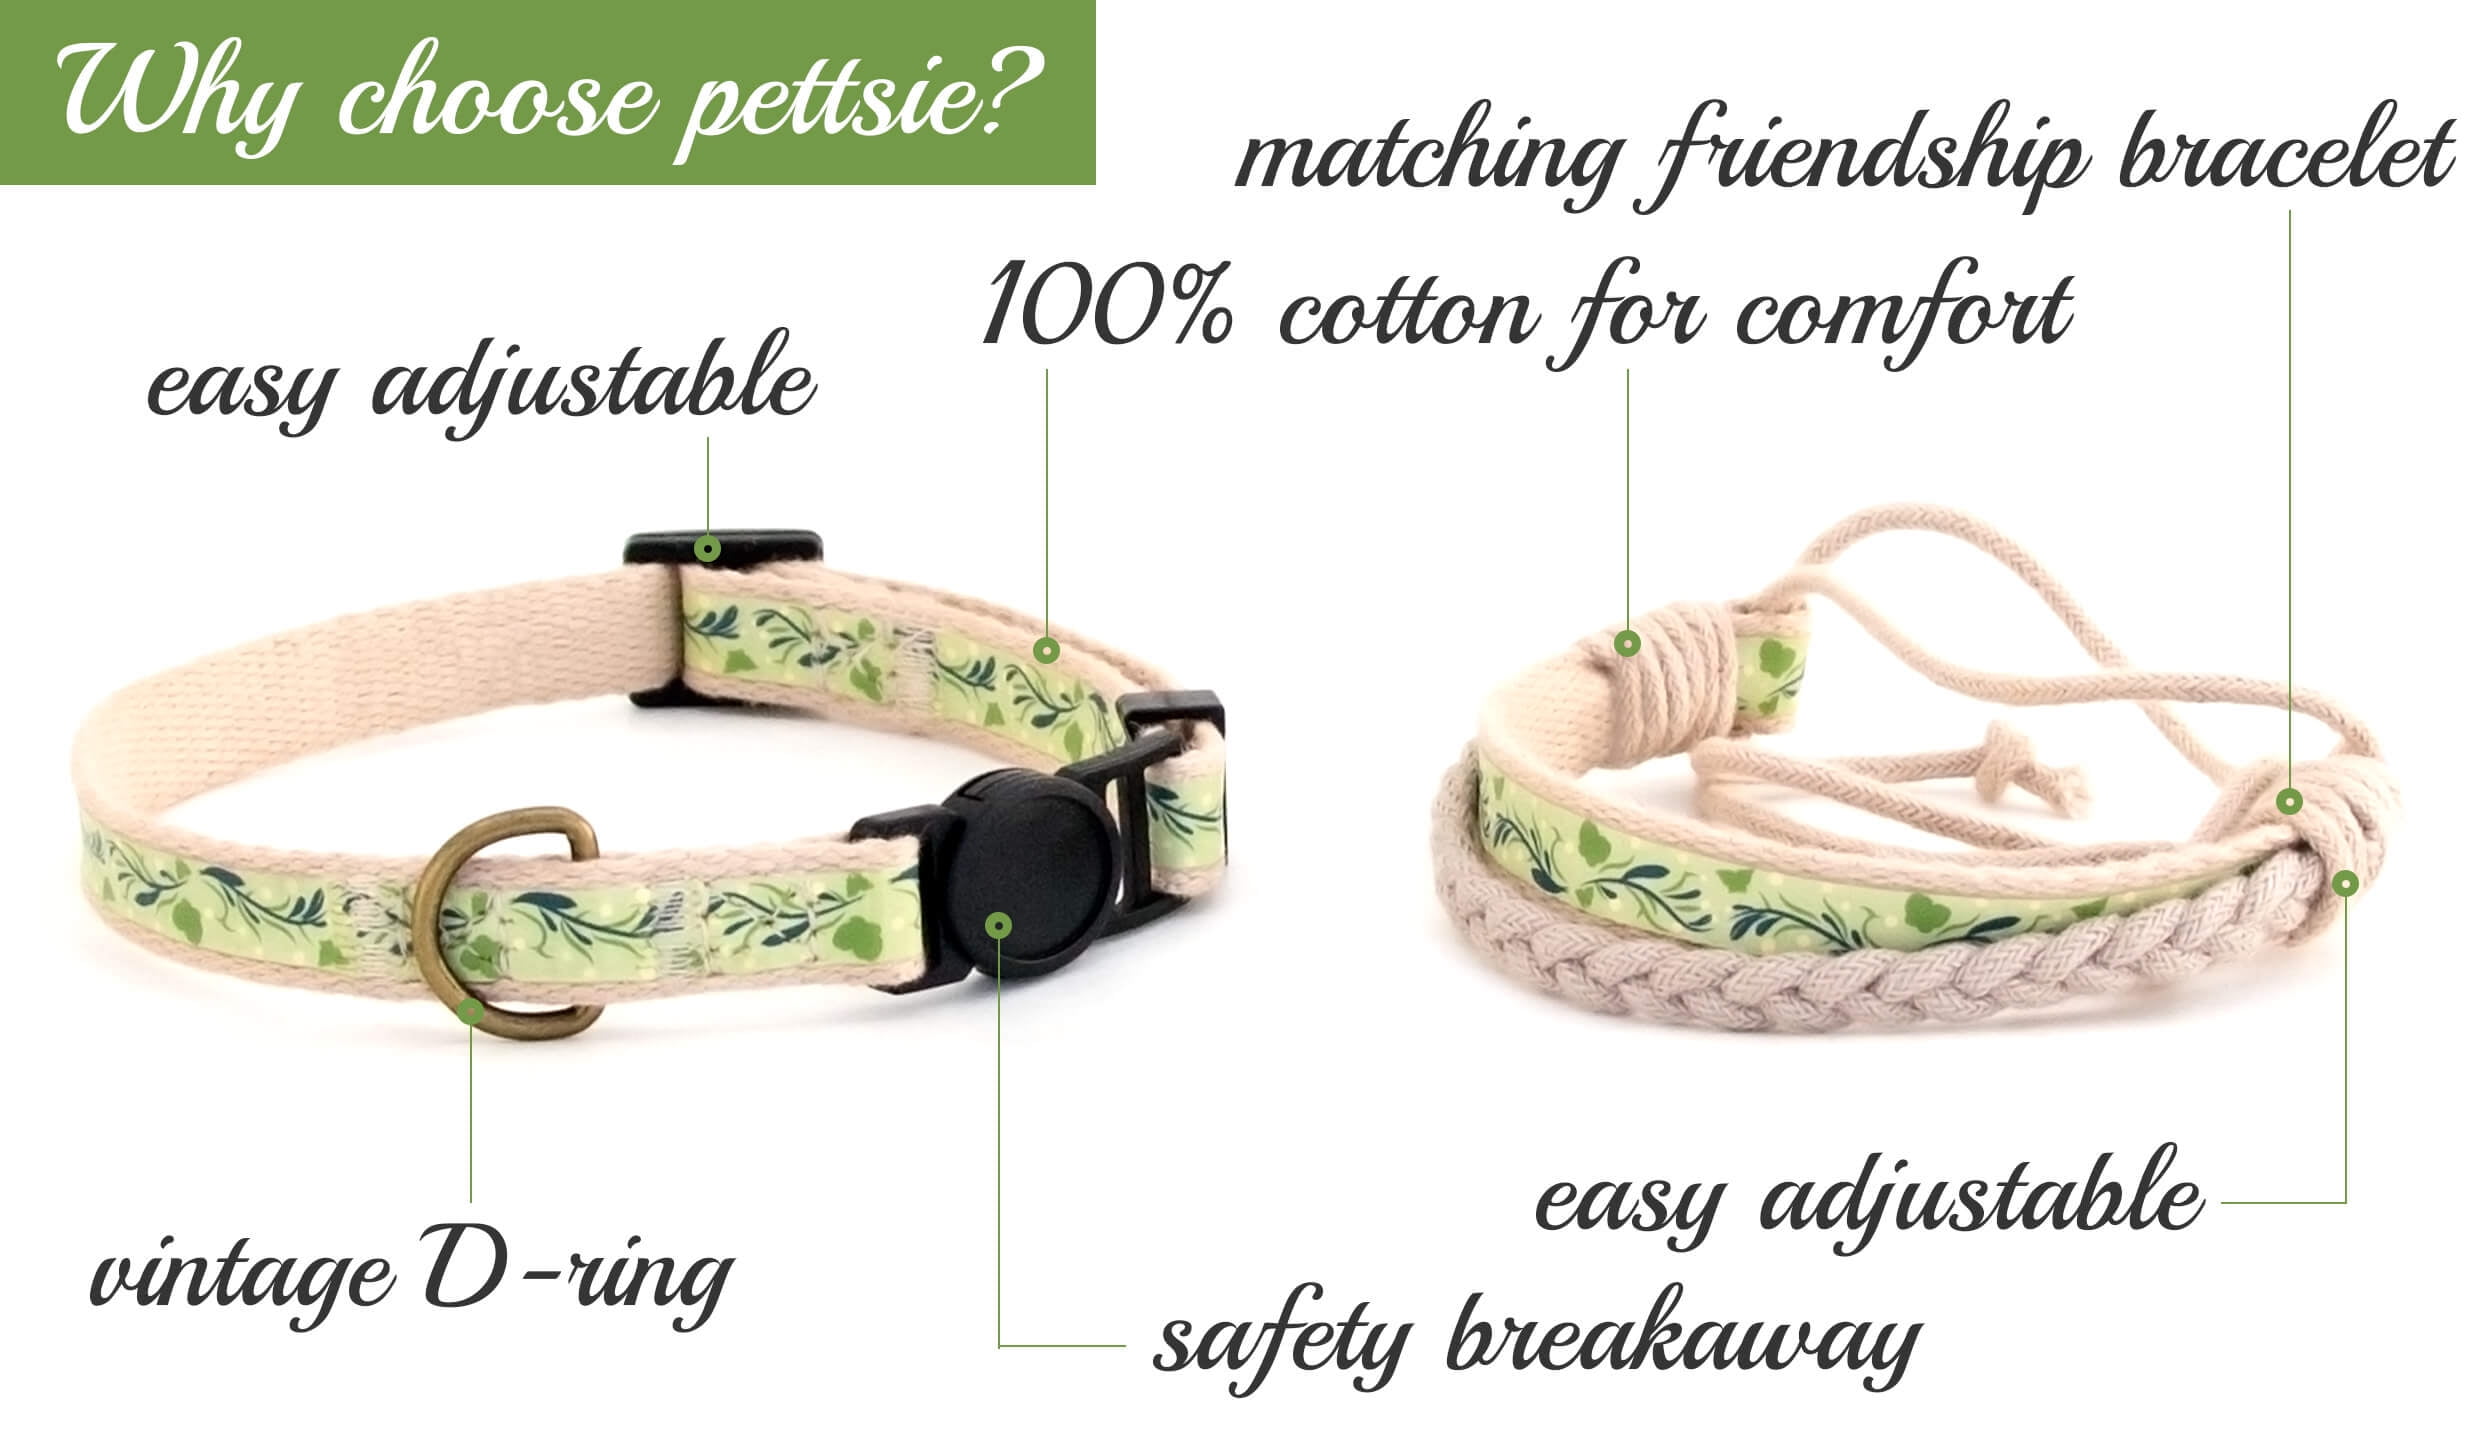 Strong and Durable Pettsie Cat Collar Breakaway Safety with Heart and Friendship Bracelet for You Soft and Natural 100% Cotton for Extra Comfort Easy Adjustable Size 8-11 Inch 